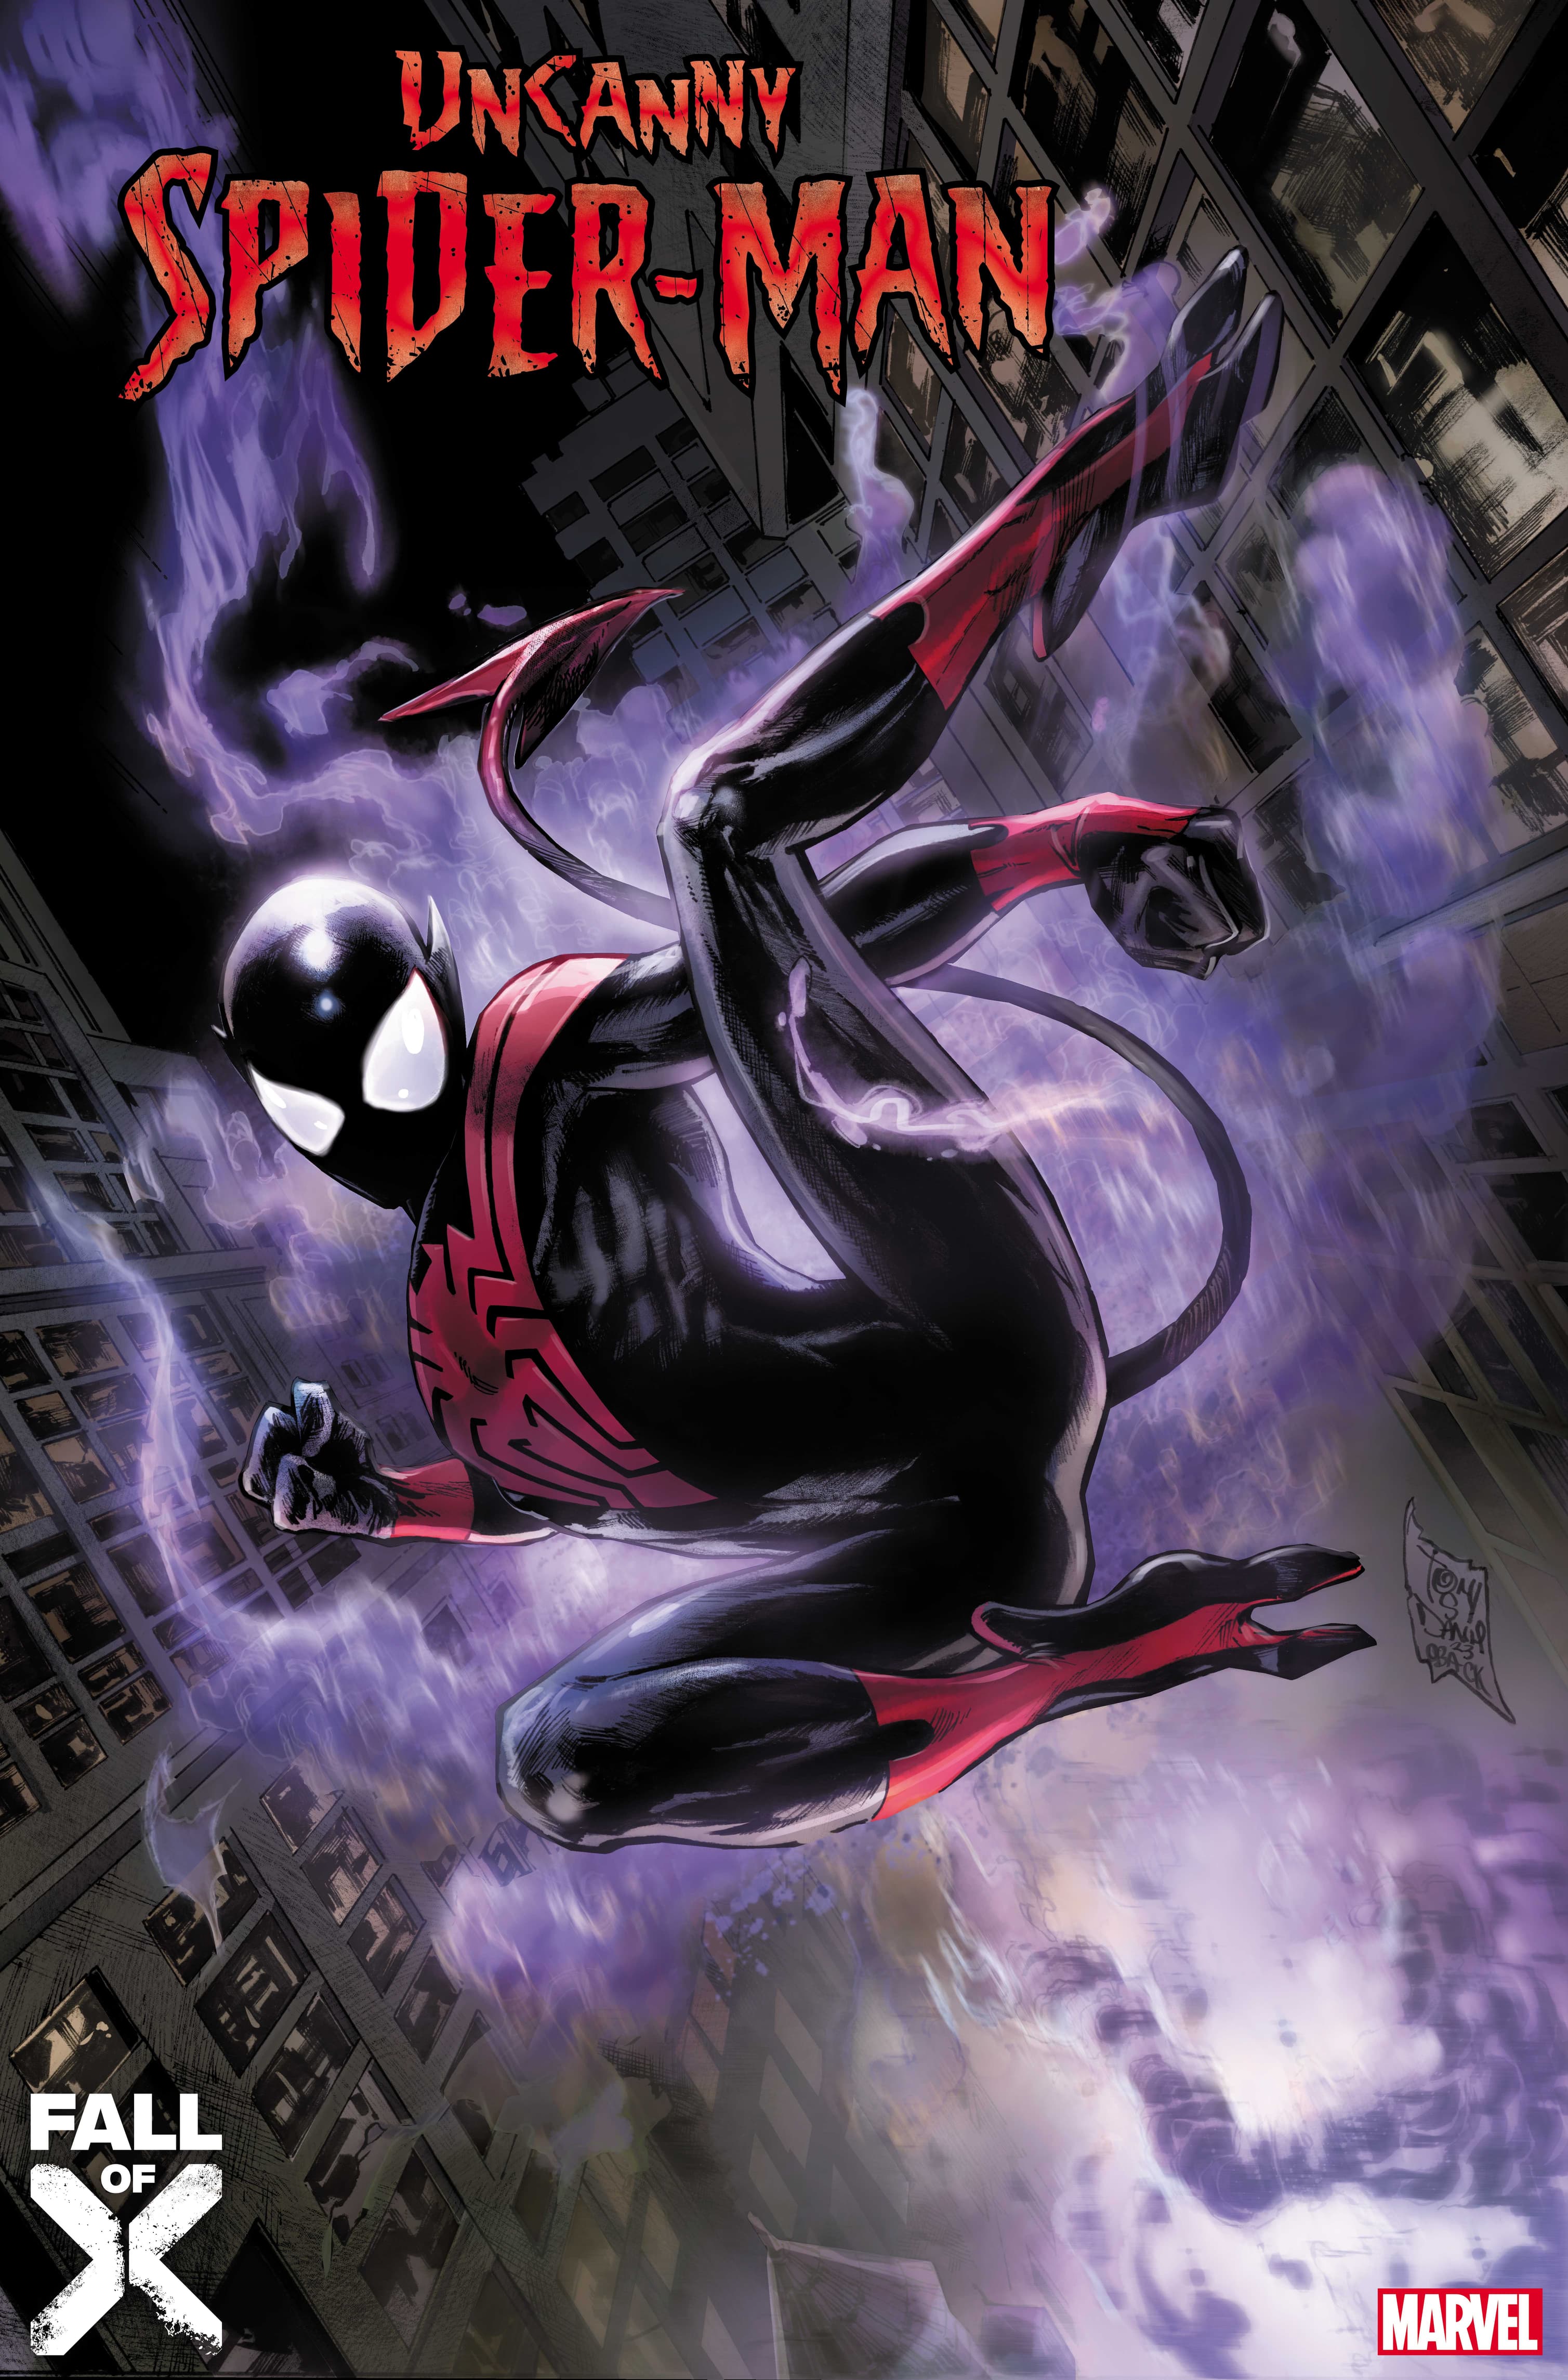 UNCANNY SPIDER-MAN #1 cover by Tony Daniel